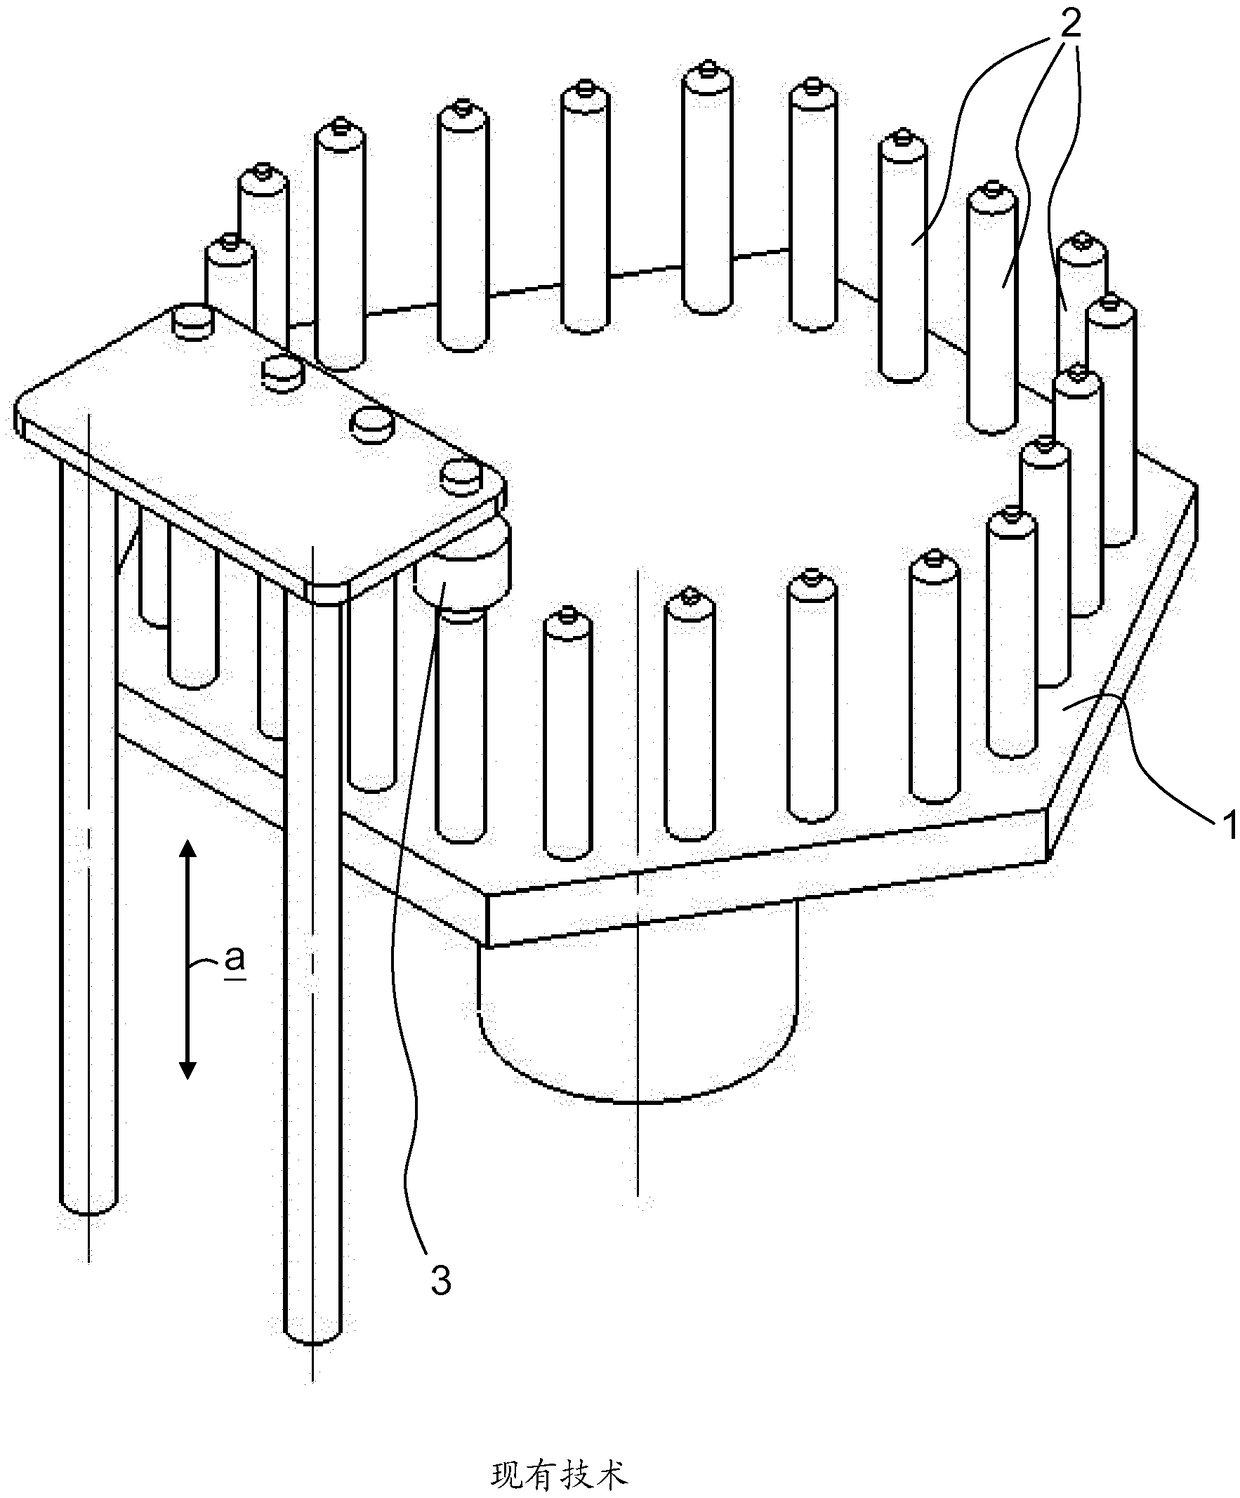 Unit for assembling and/or treating components